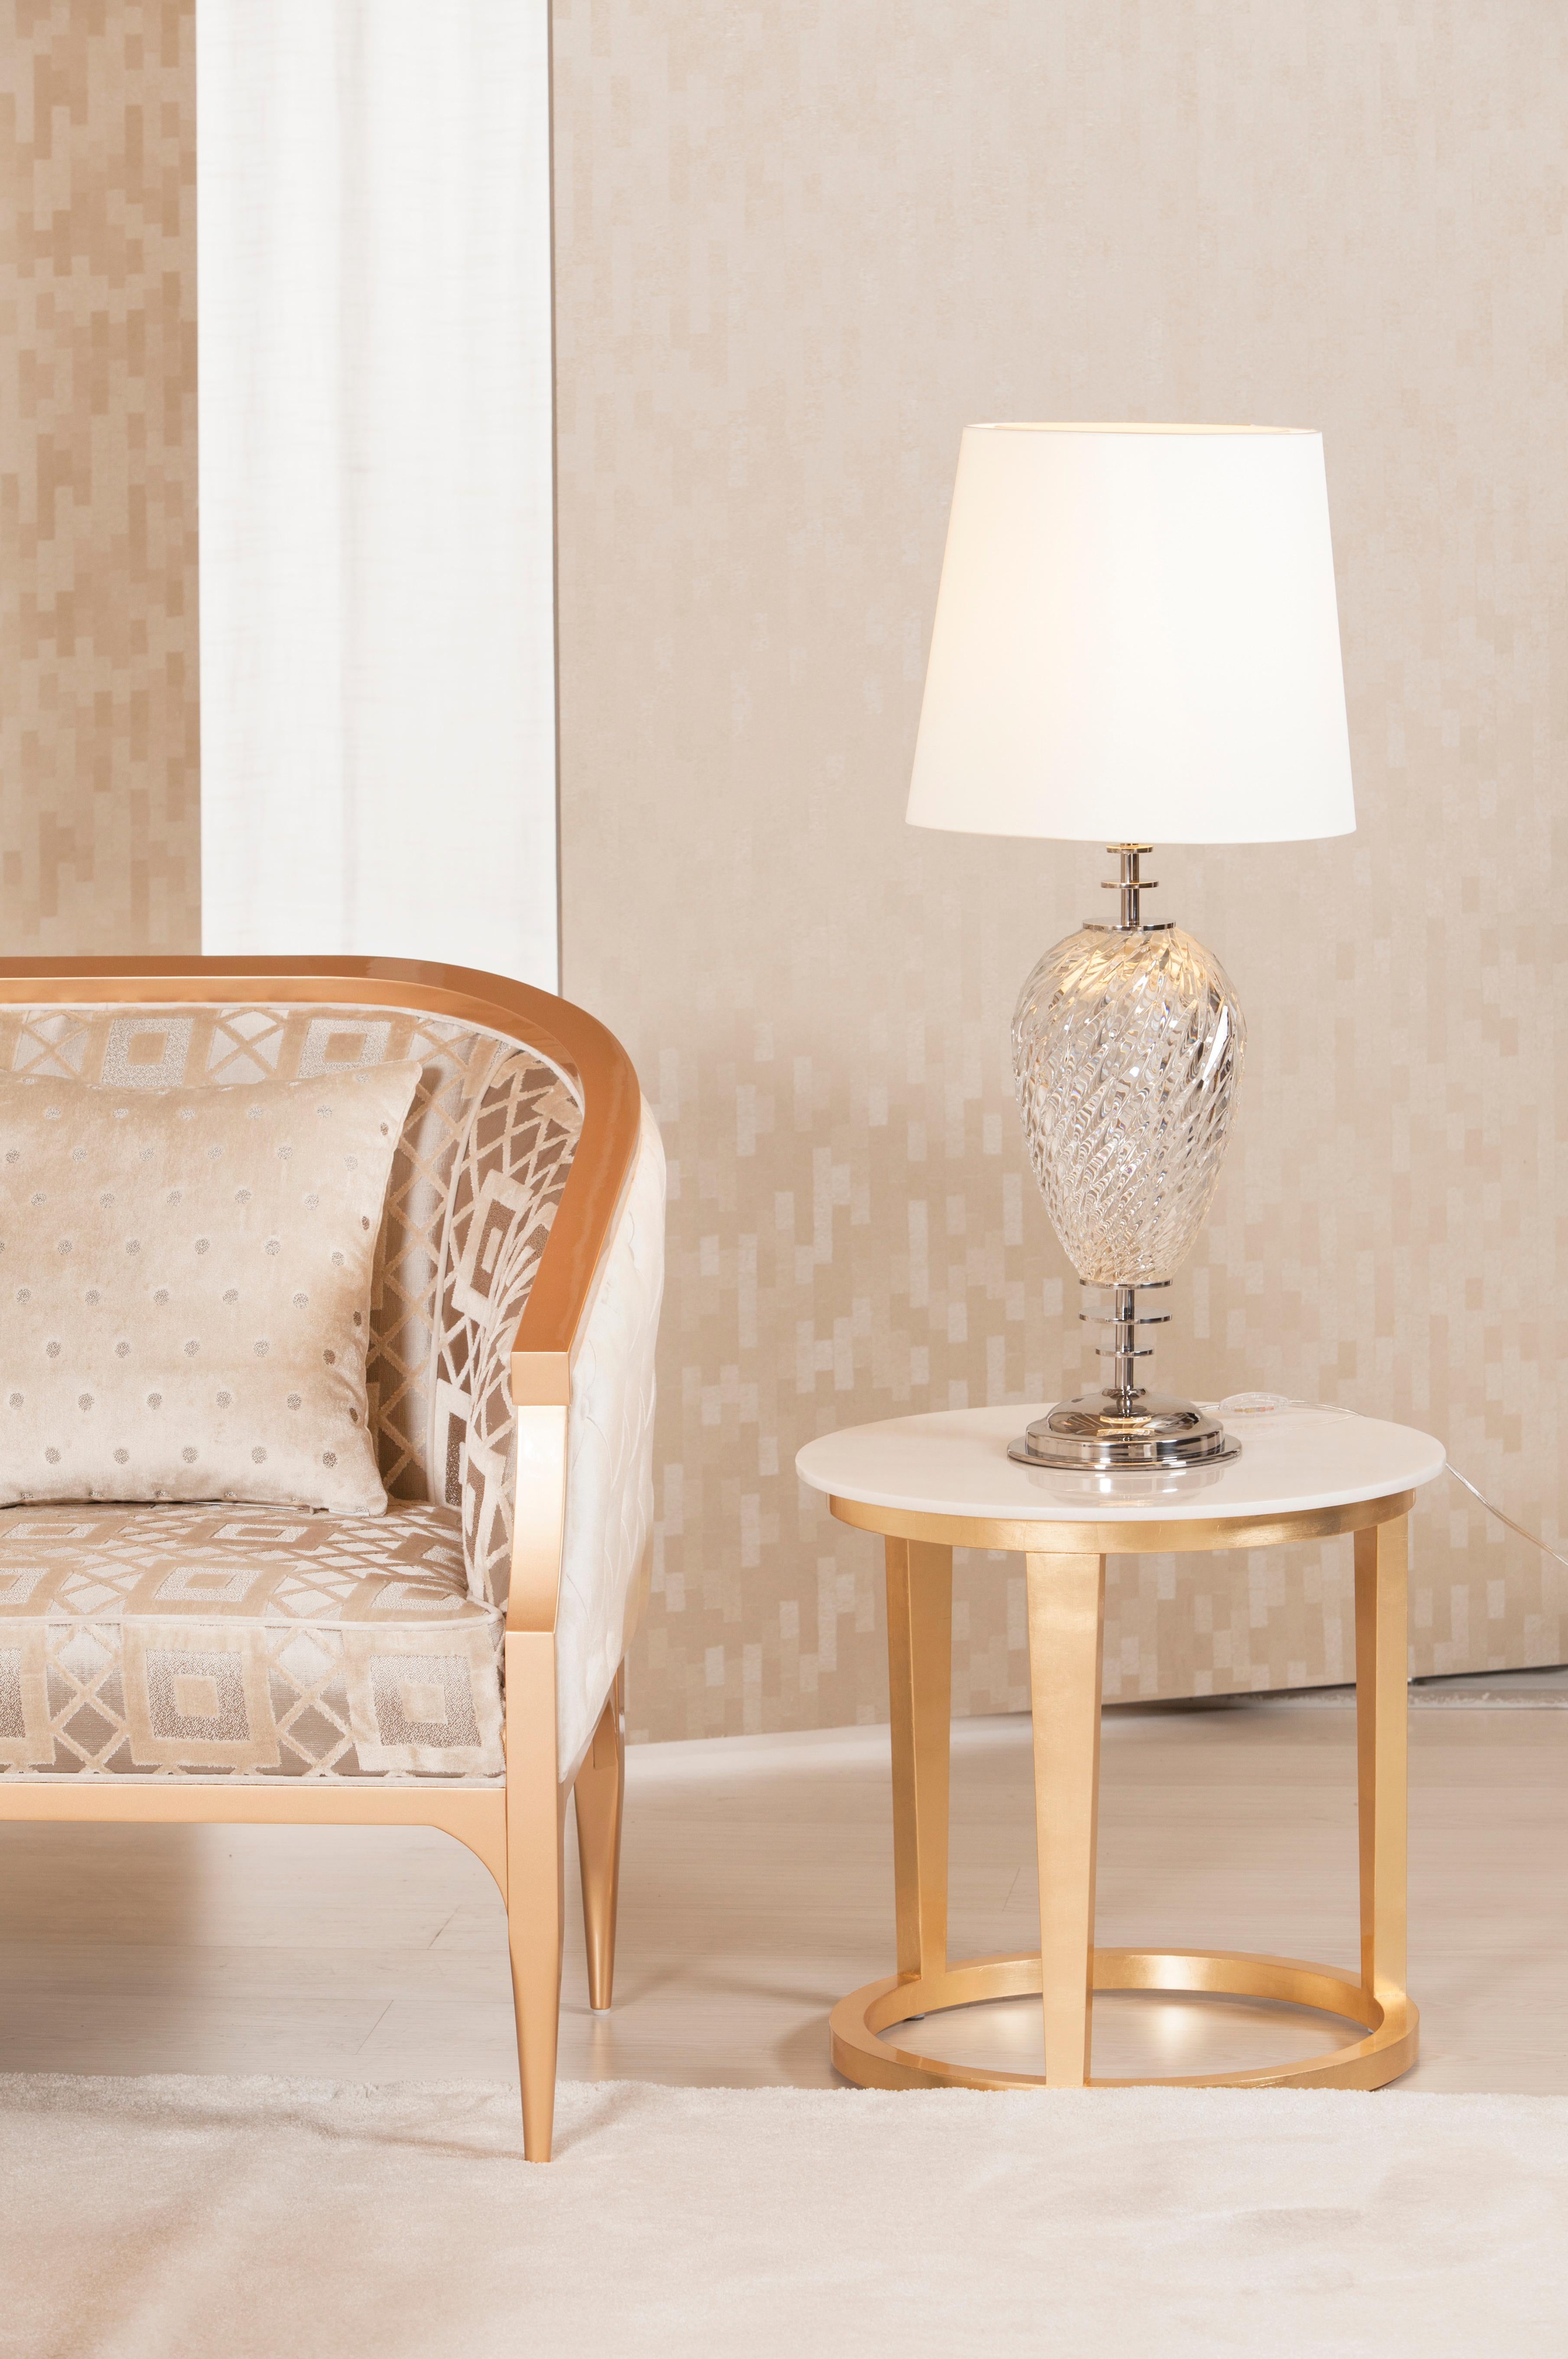 Marques table lamp, Modern Collection, Handcrafted in Portugal - Europe by GF Modern.

A luxurious Art Deco table lamp, Marques creates the subliminal ambiance for exceptional living.

The handmade crystal detail harmonizes the wonderful contrast